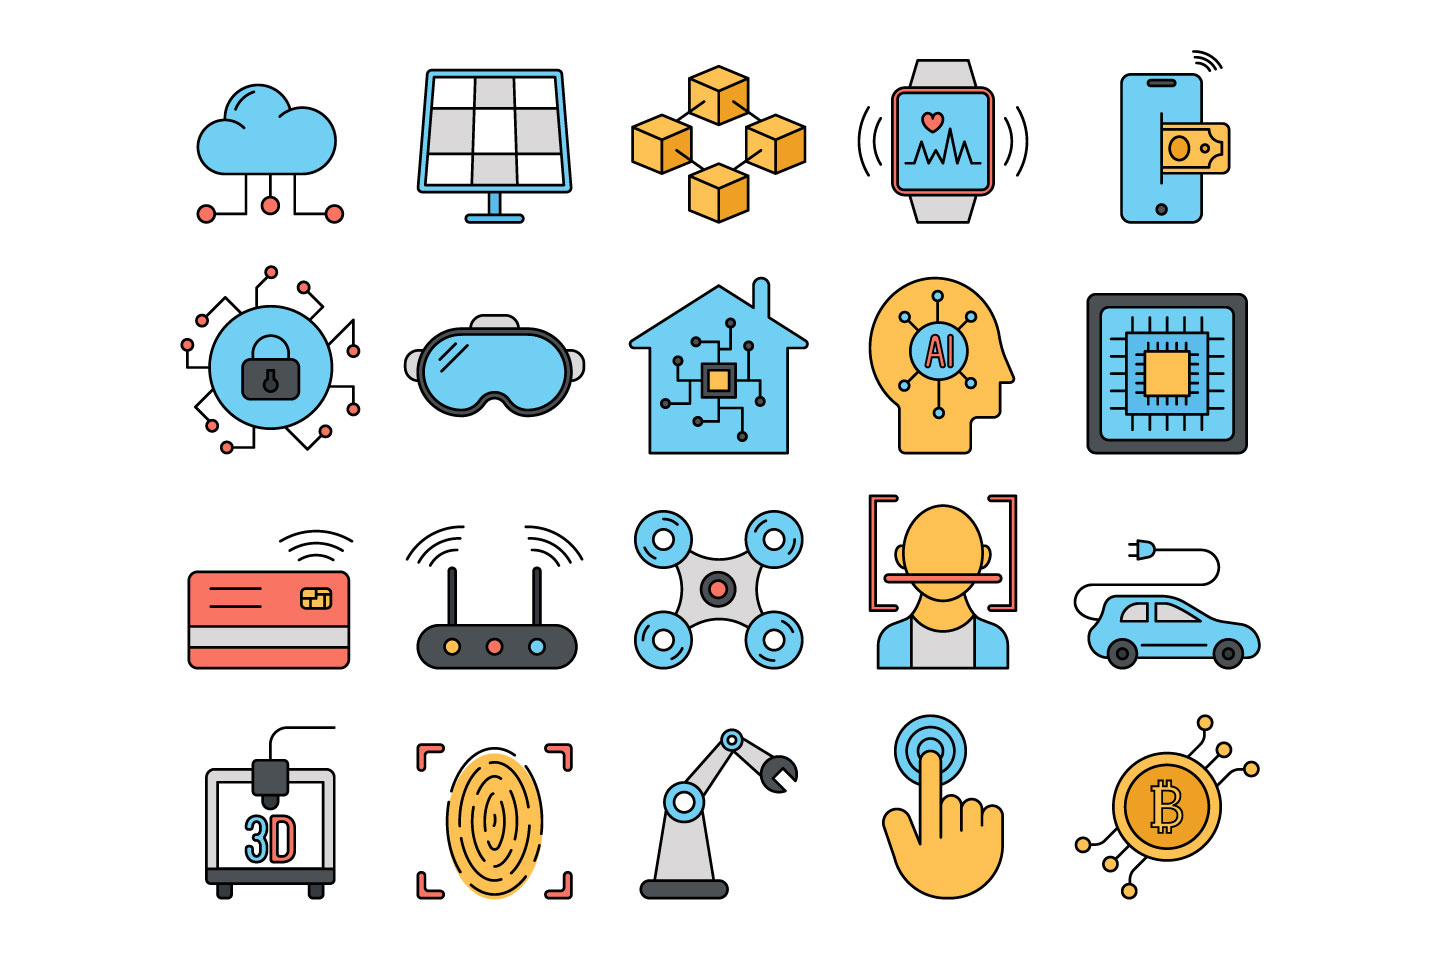 Download Technology Vector Free Icon Set - GraphicSurf.com